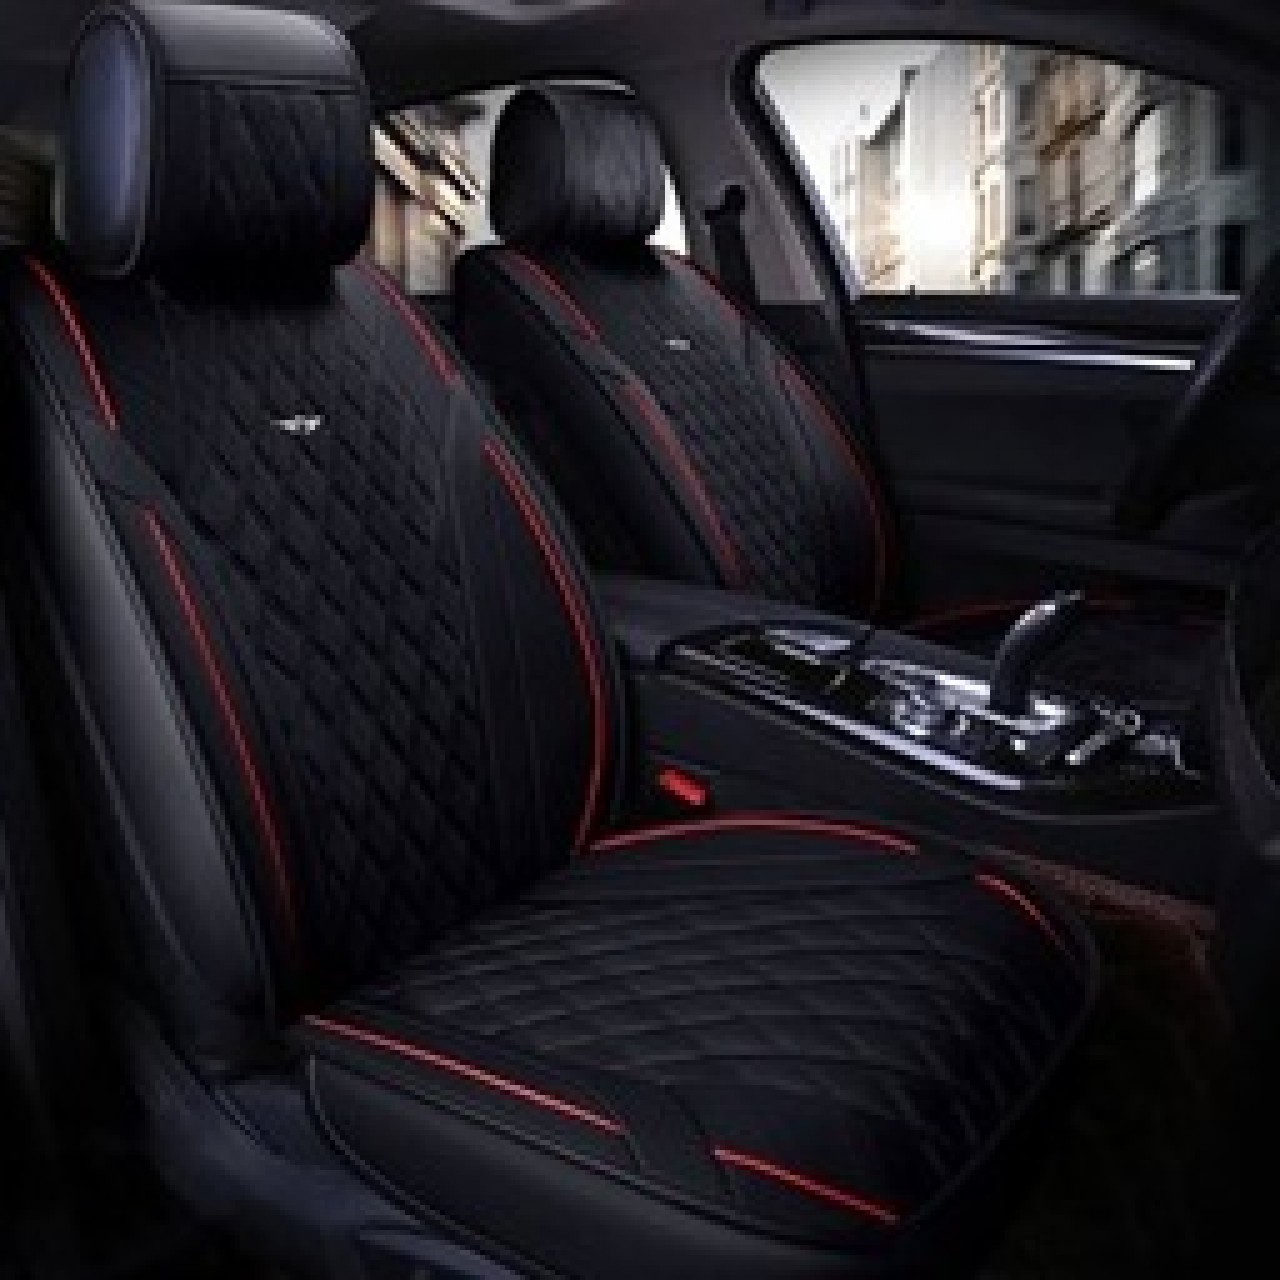 Japanese Universal Luxurious Seat Covers For Car  -5 Seats - Black